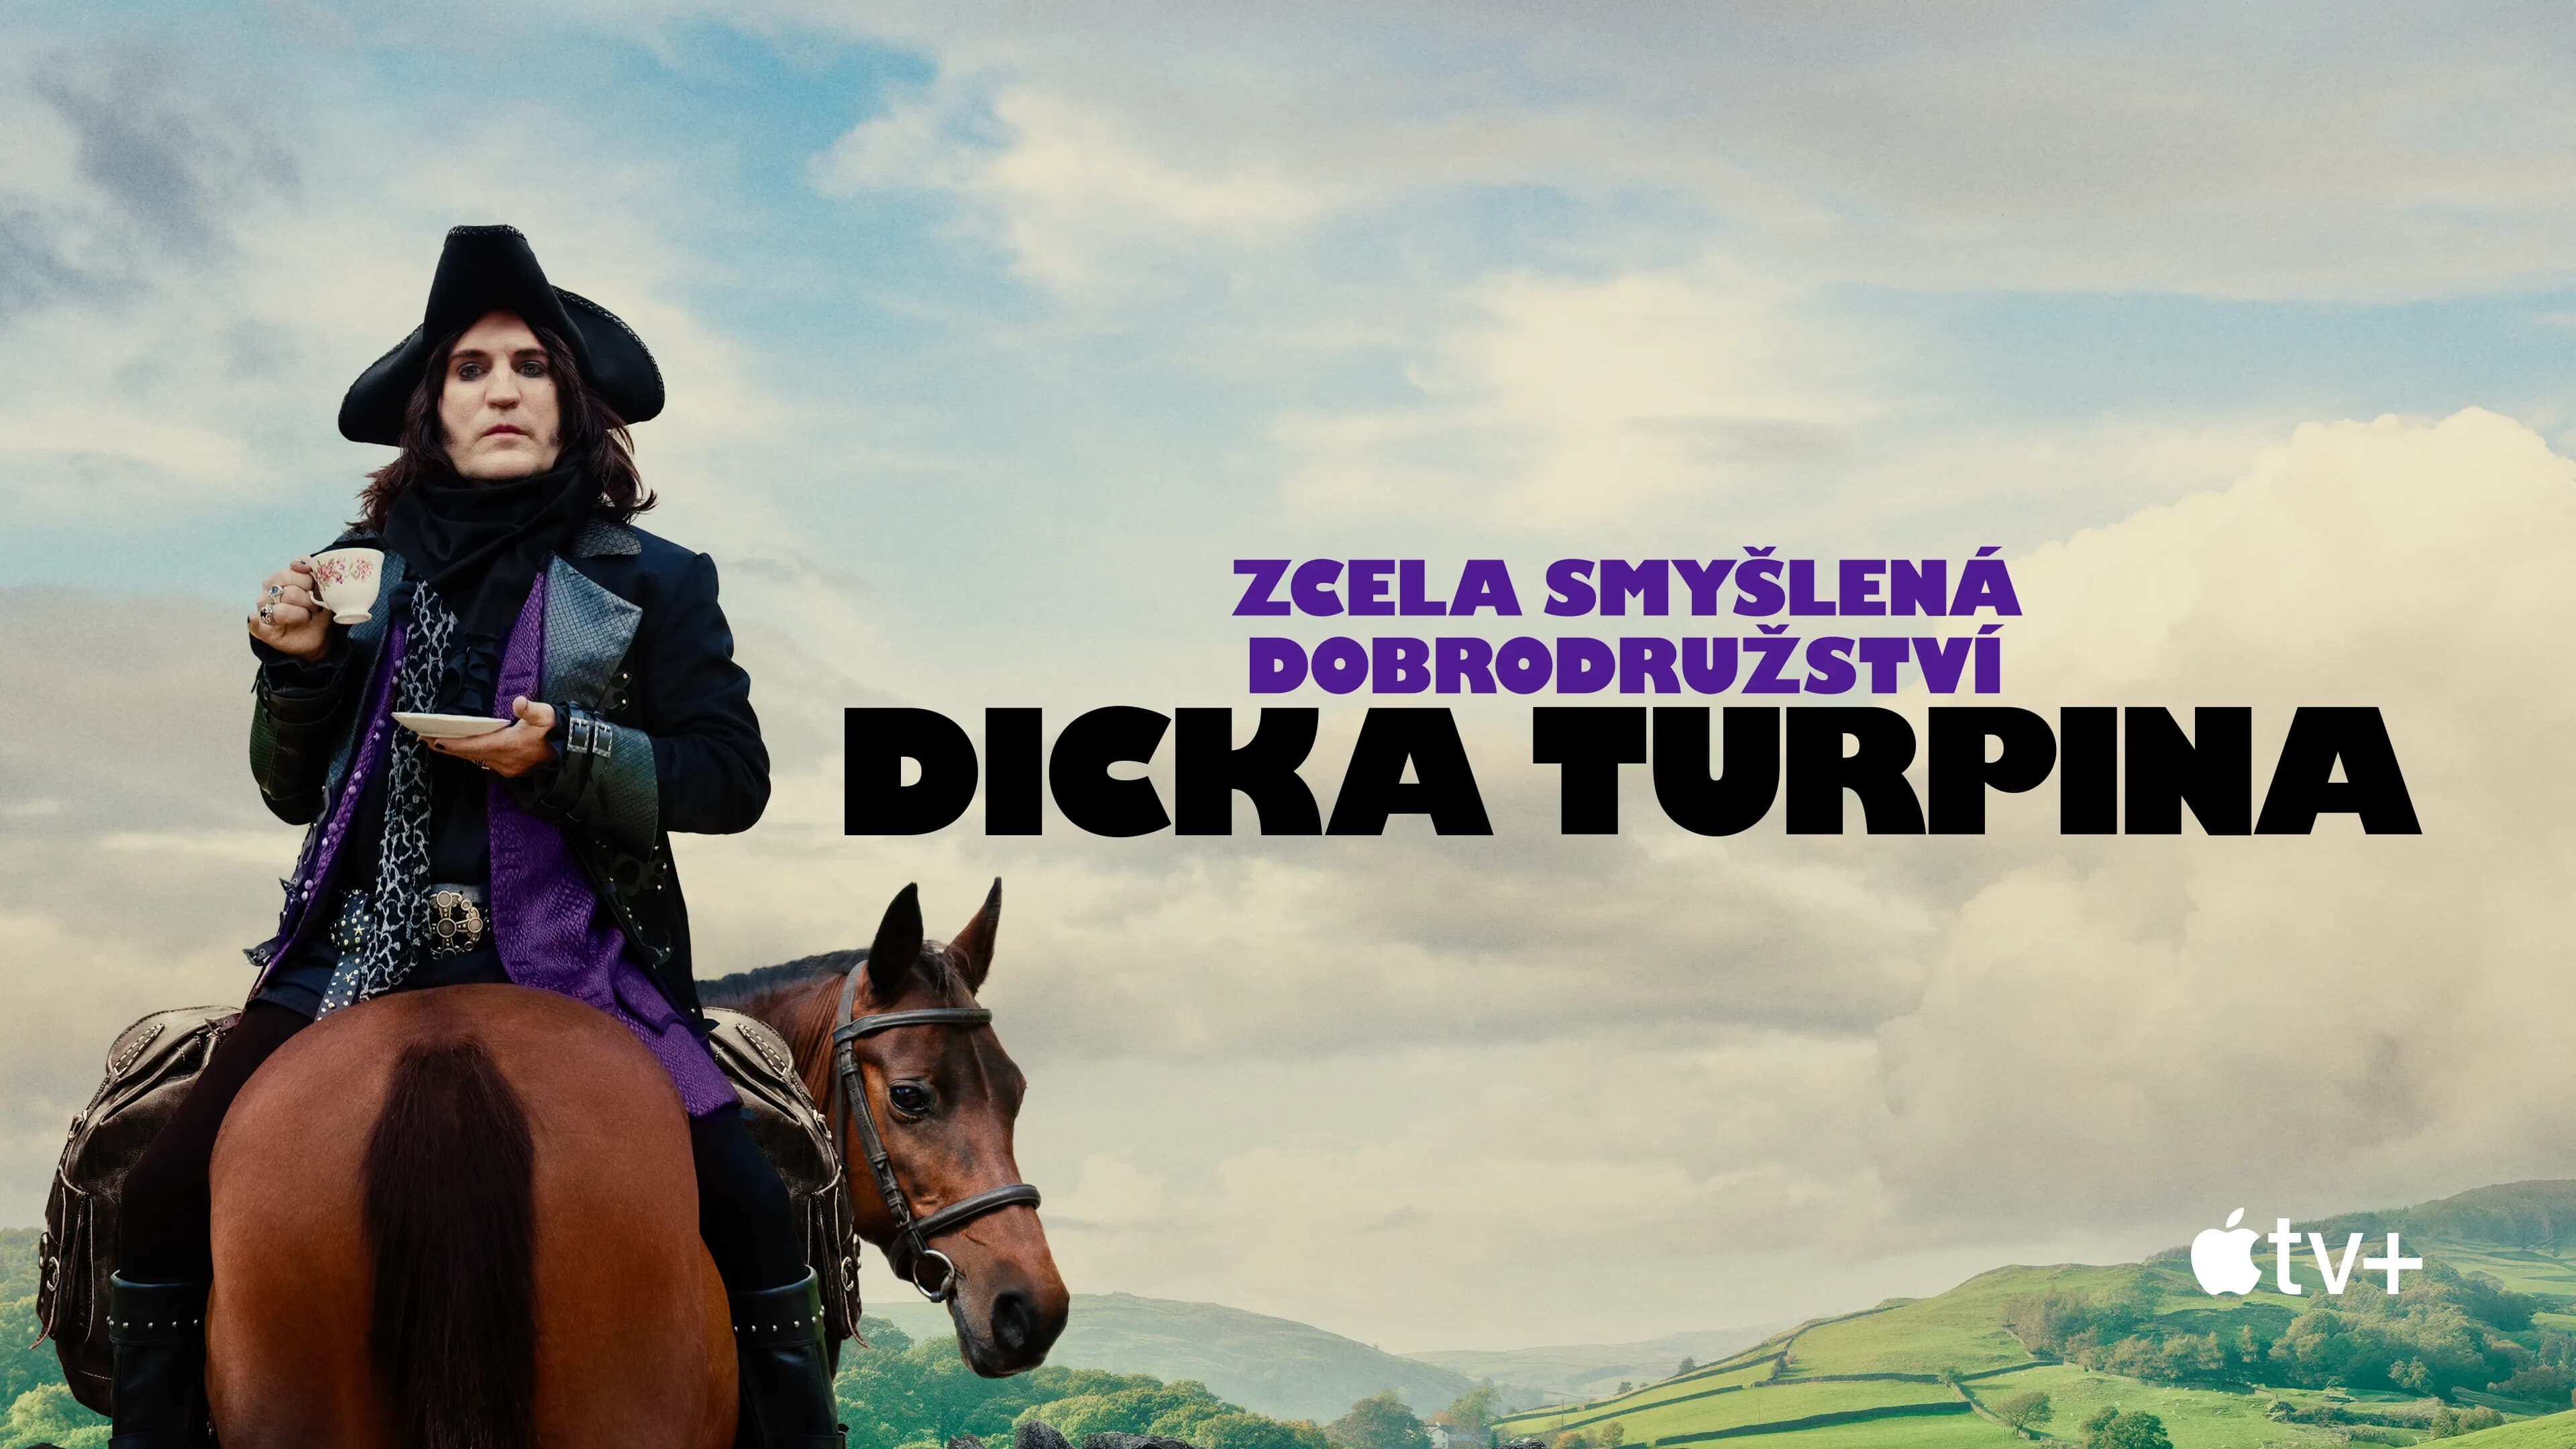 The Completely Made-Up Adventures of Dick Turpin Gallery Image